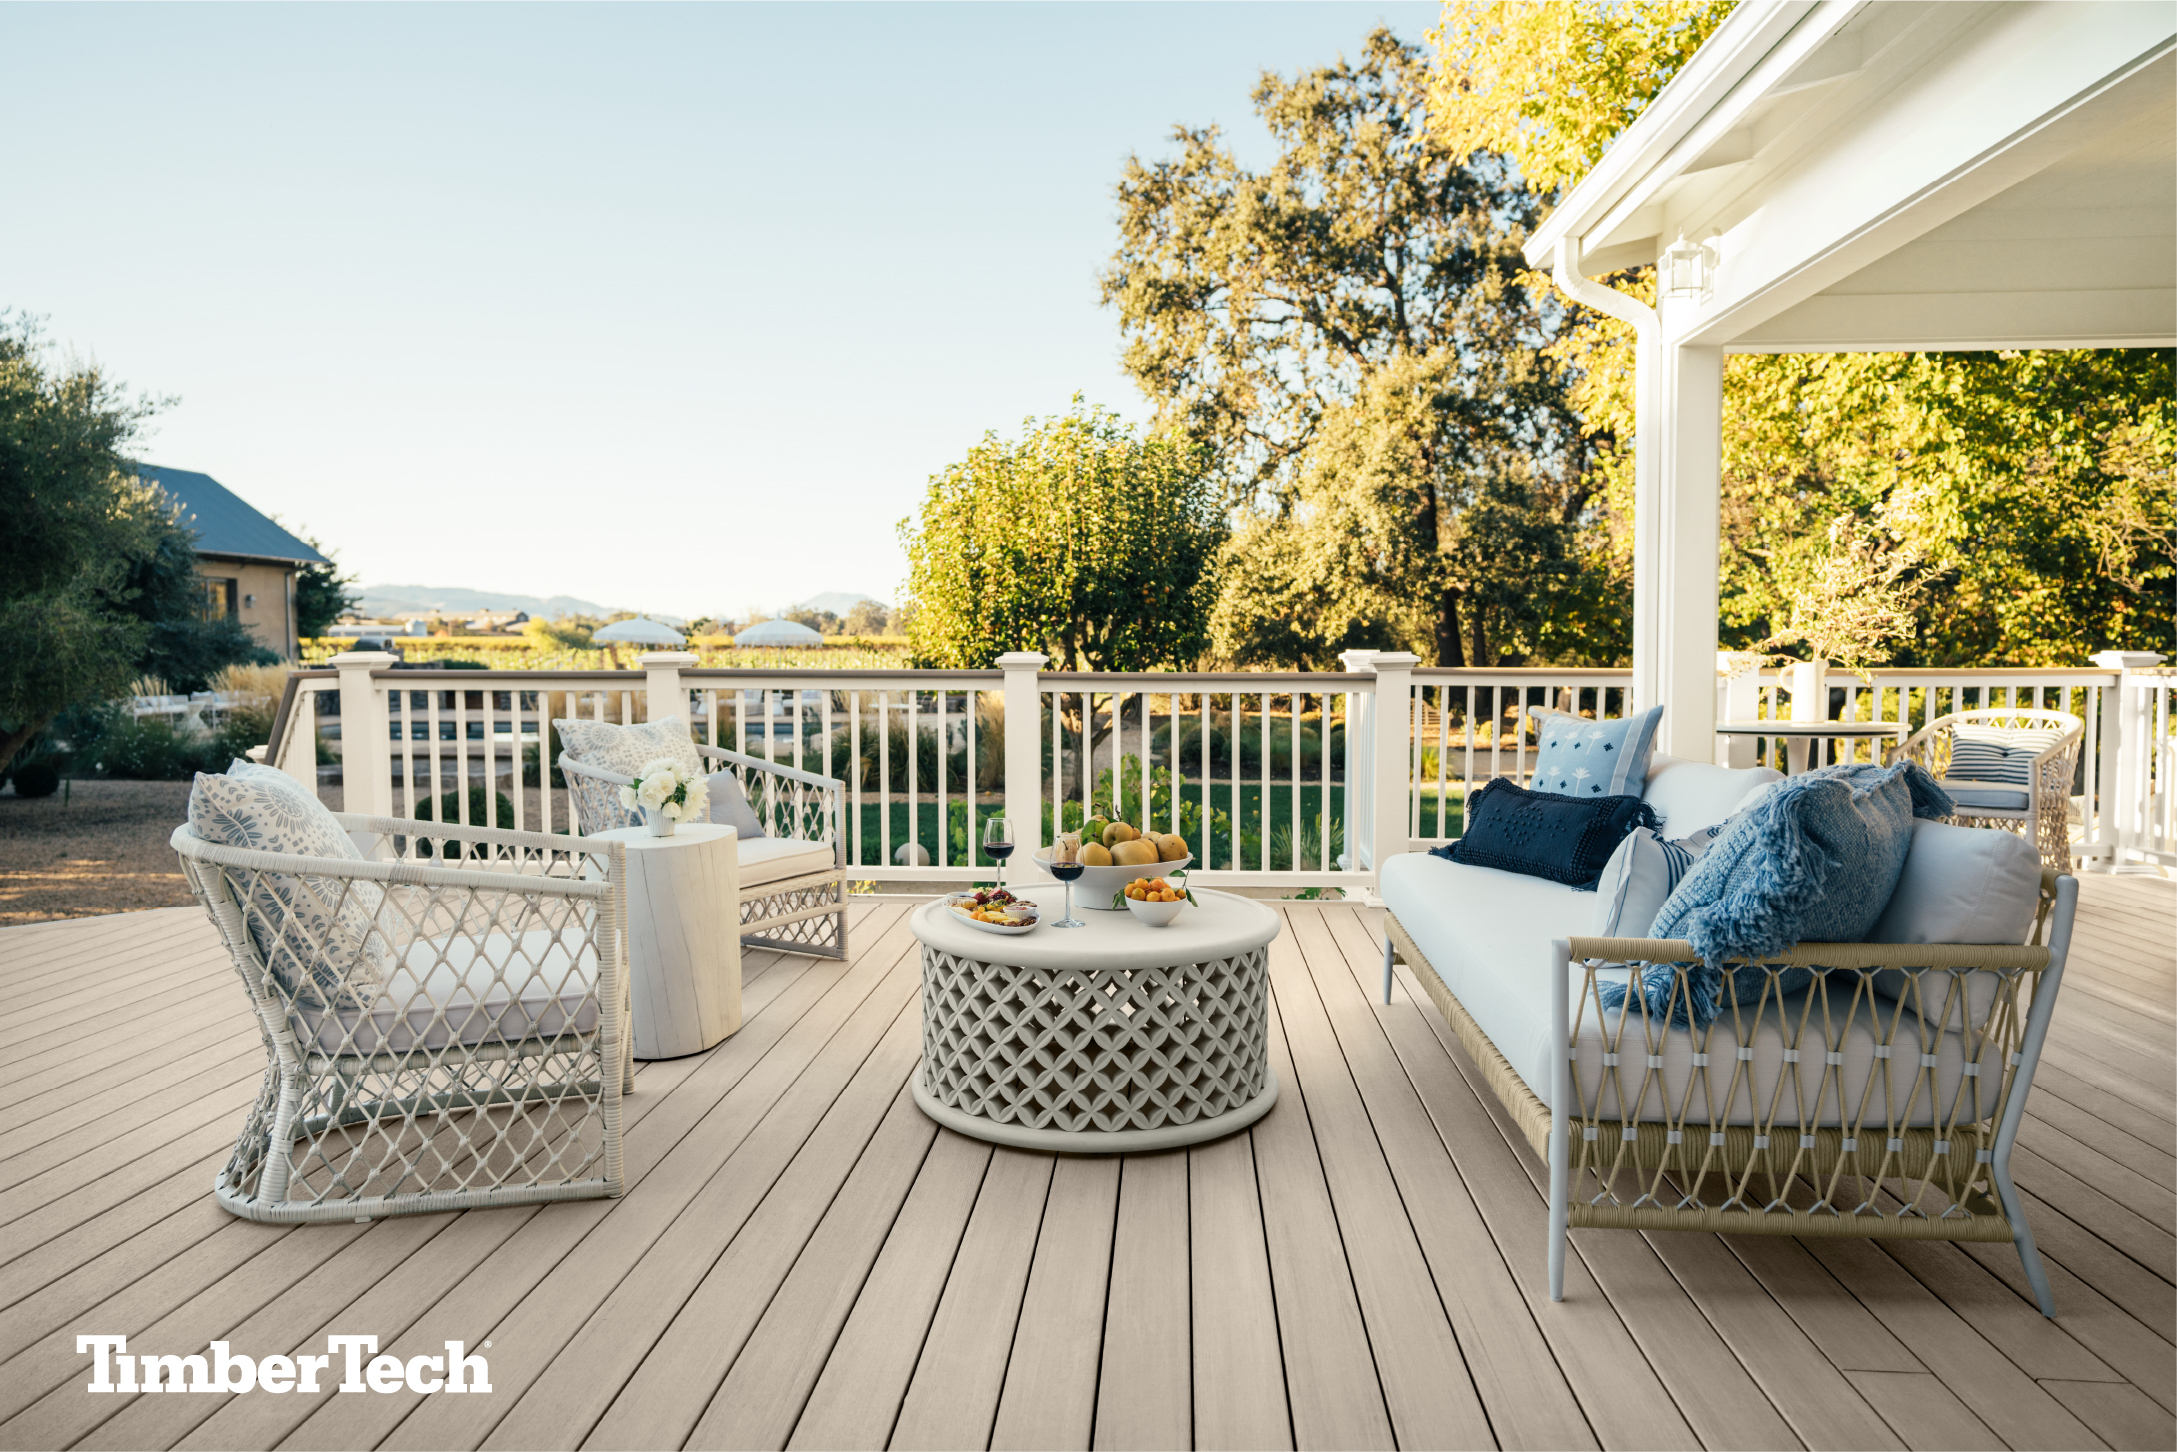 A finished, light-colored TimberTech deck decorated with white patio furniture.